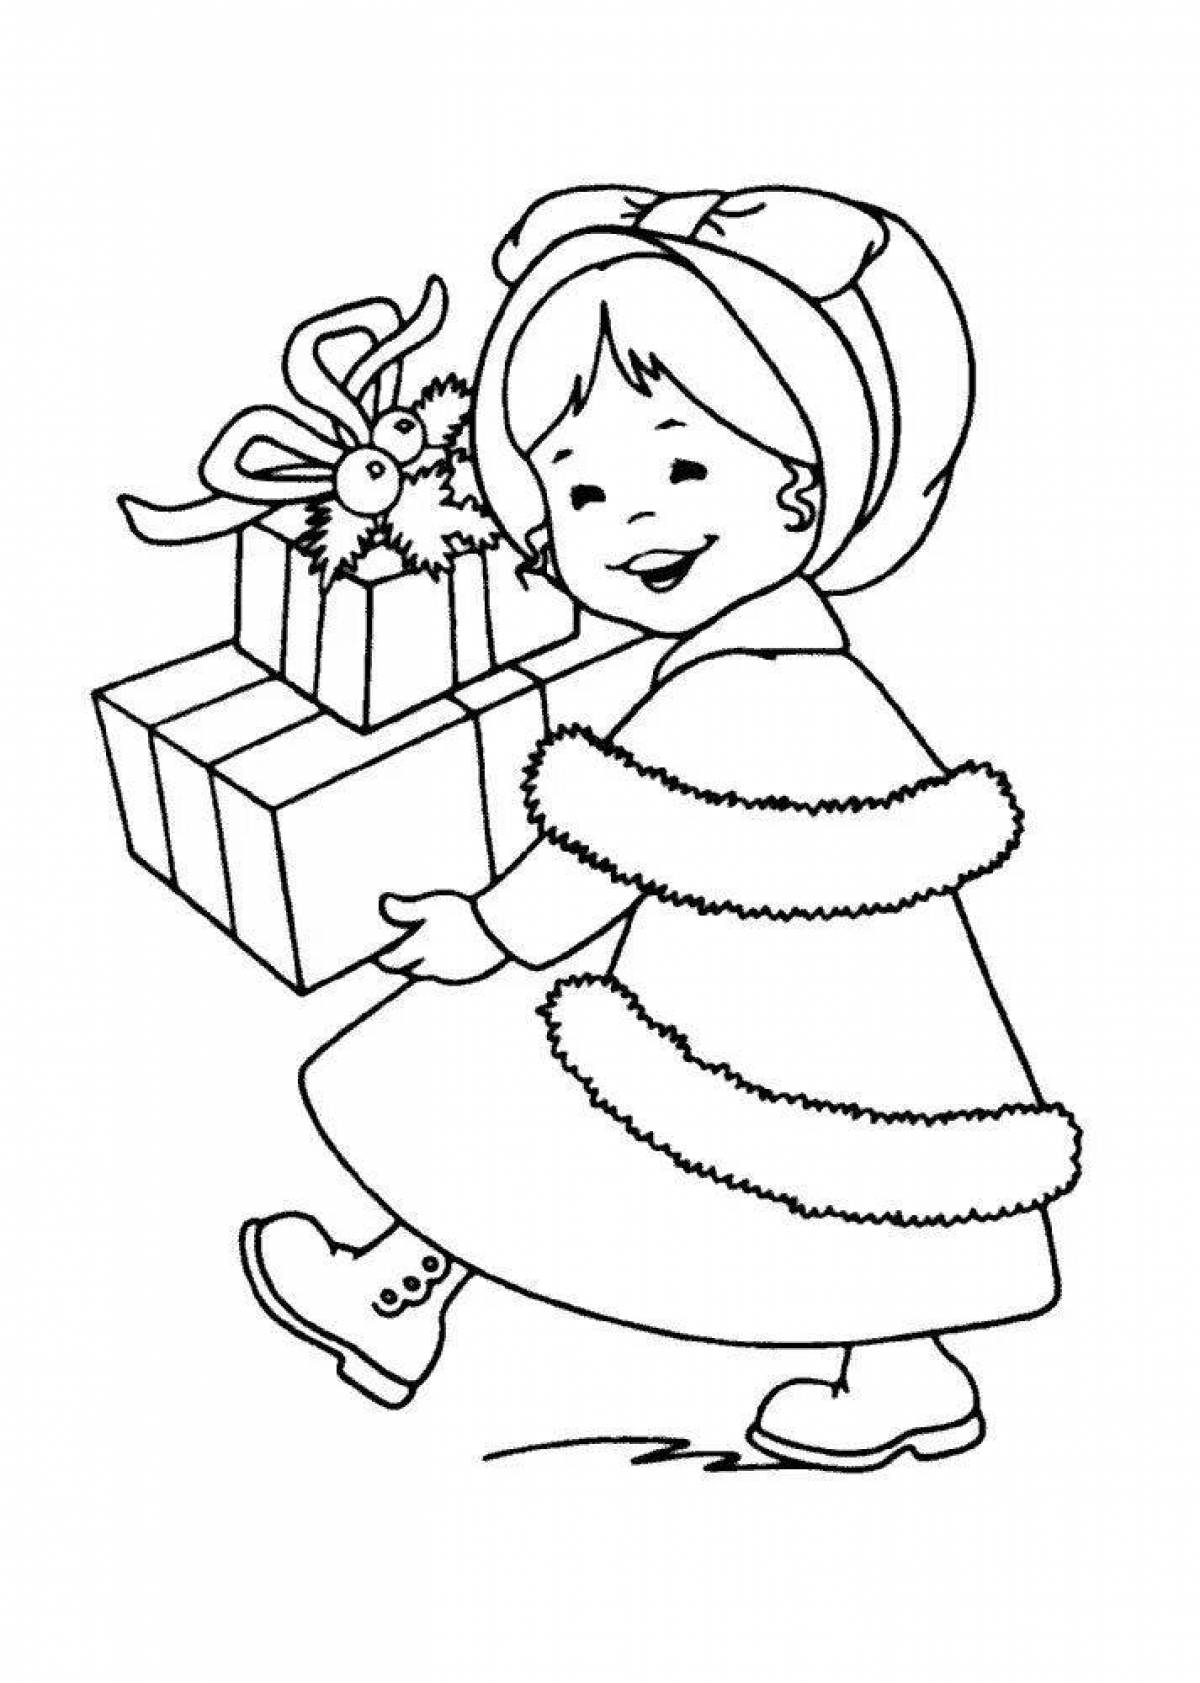 Amazing Christmas coloring book for girls